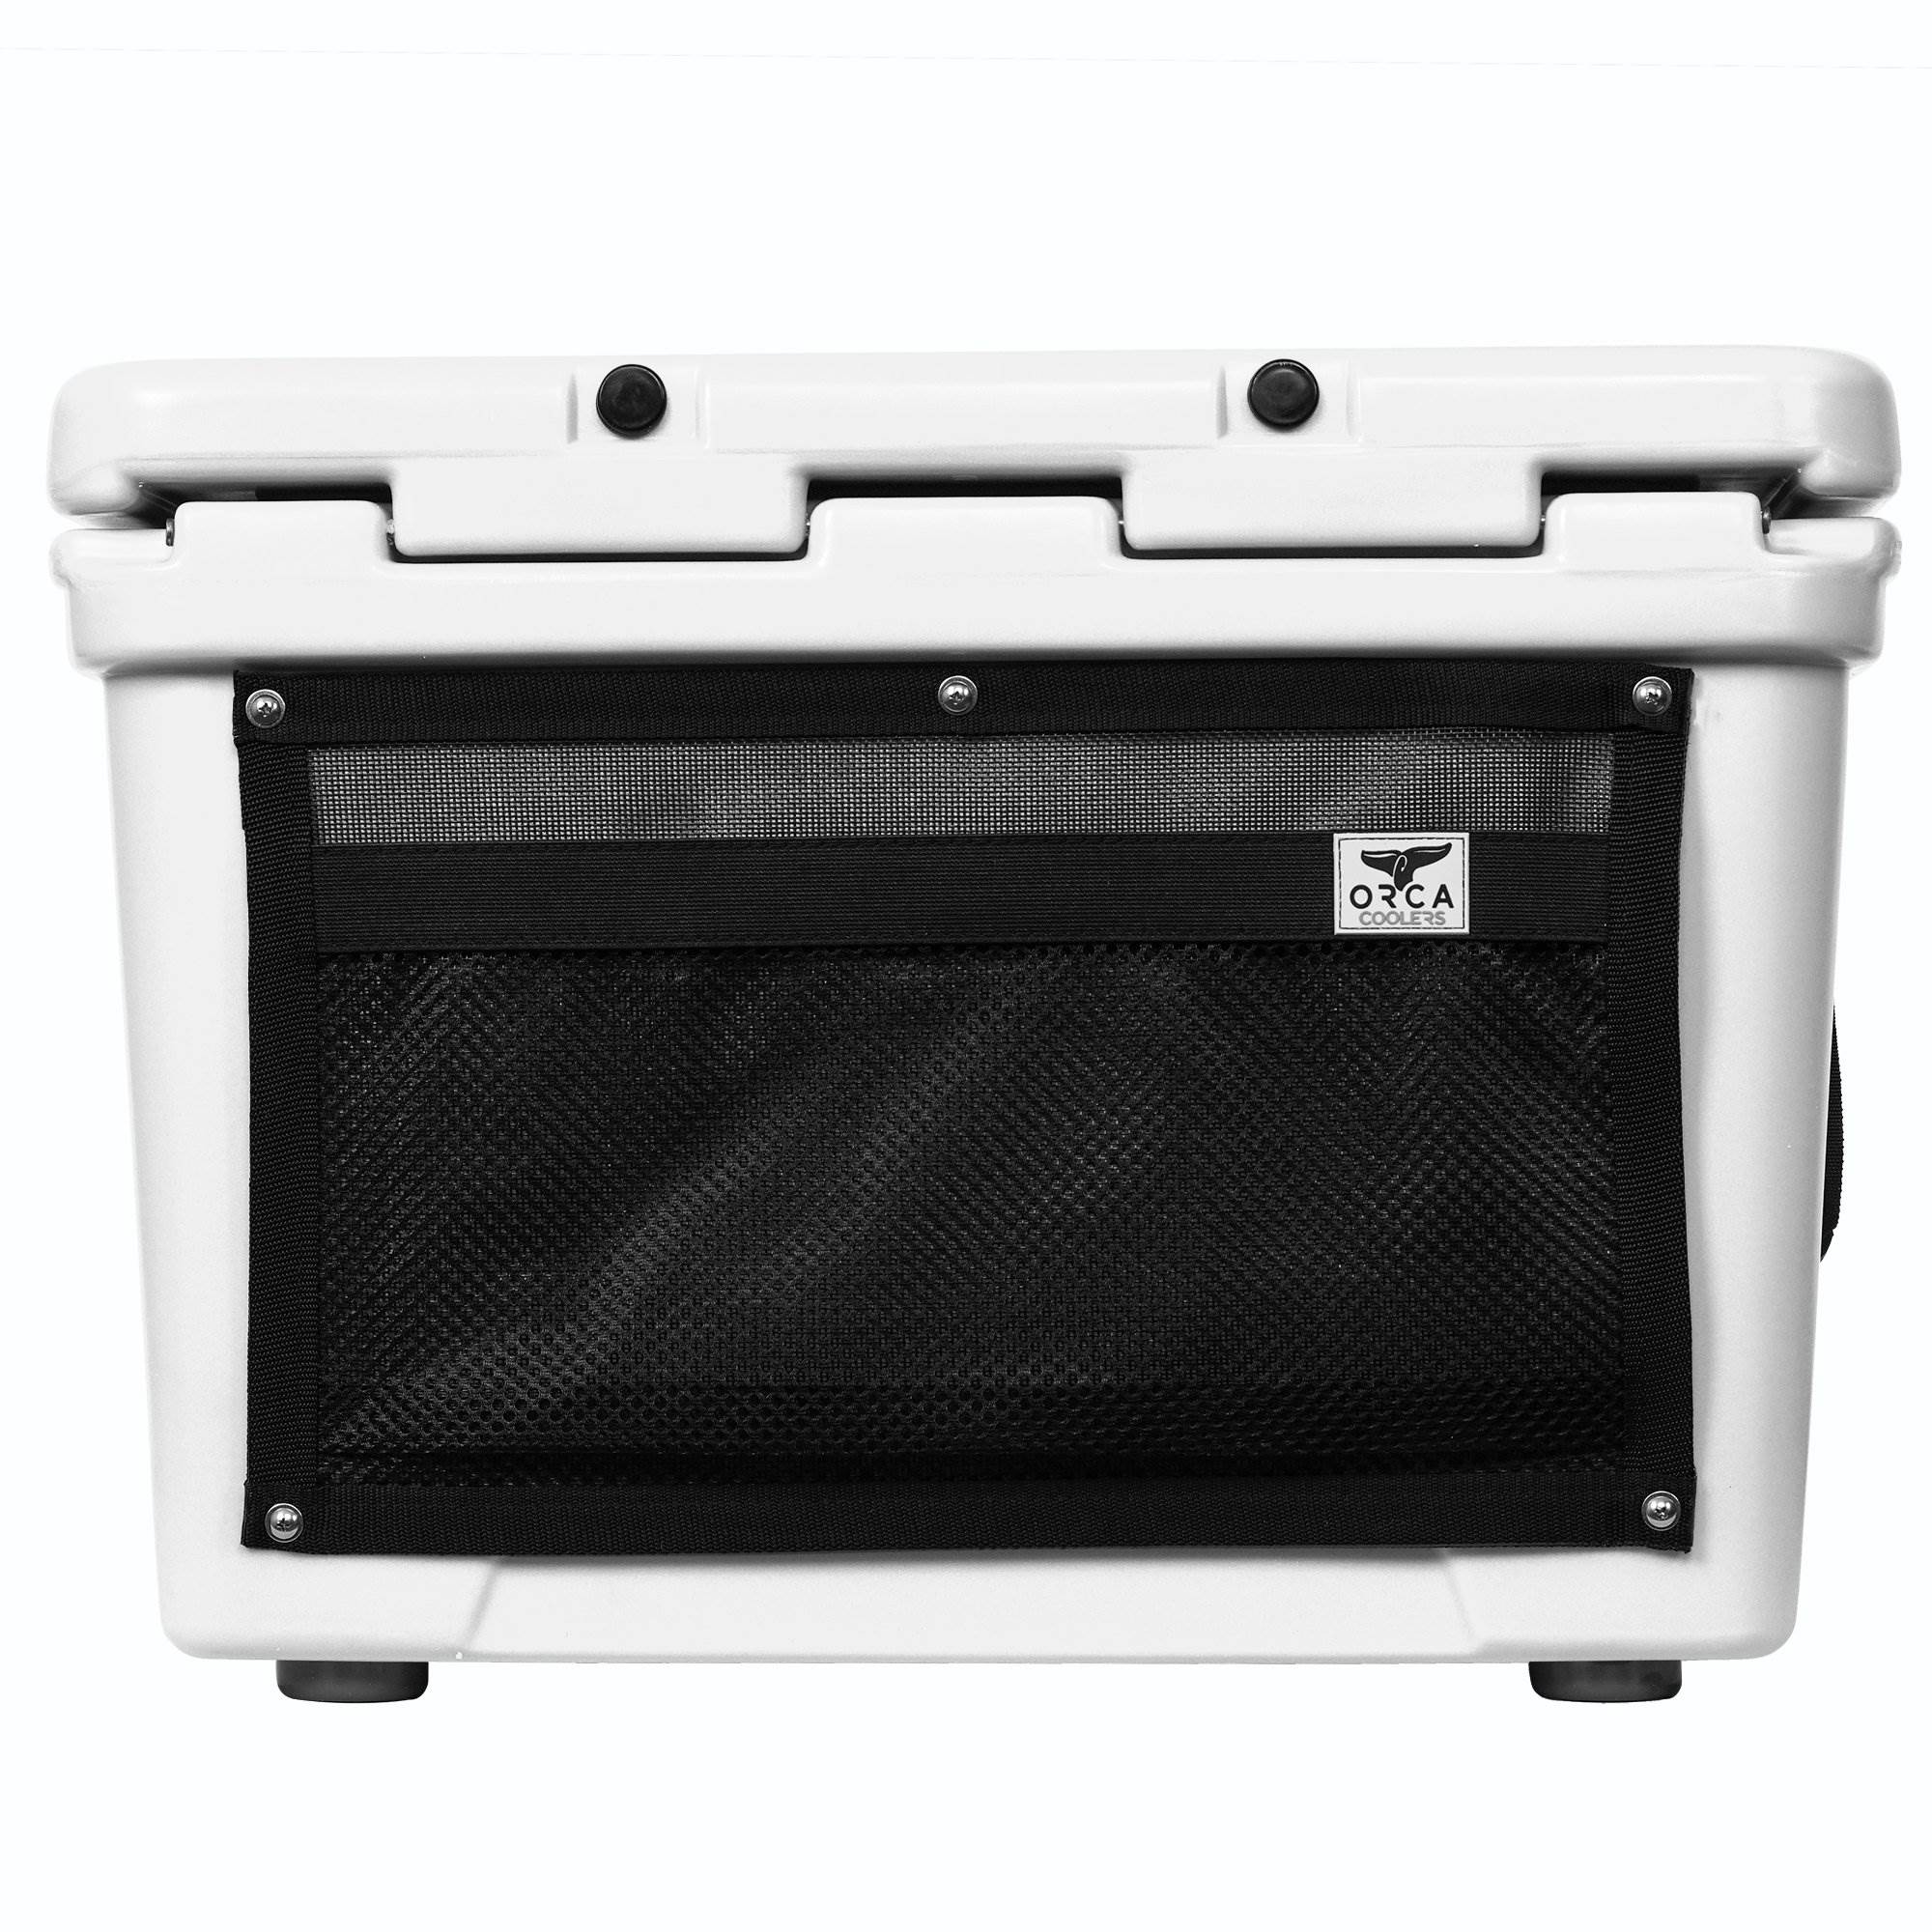 Orca 58 Quart 72 Can High Performance Roto Molded Insulated Ice Cooler, White